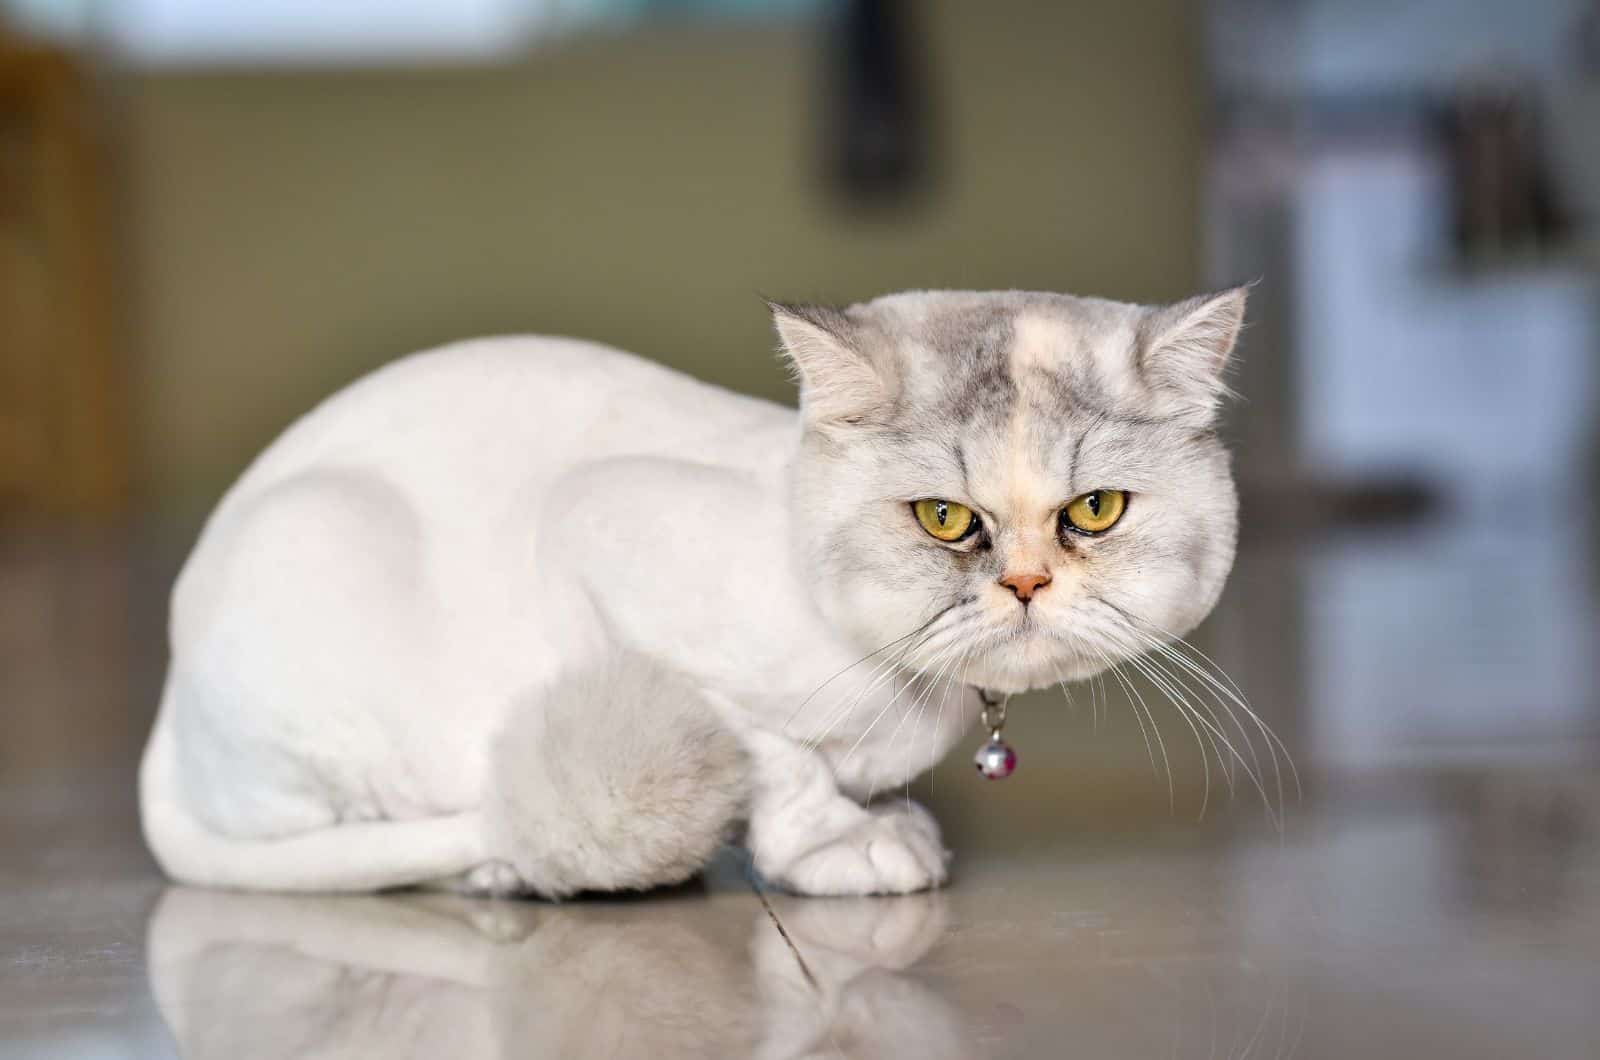 shaved cat posing for camera